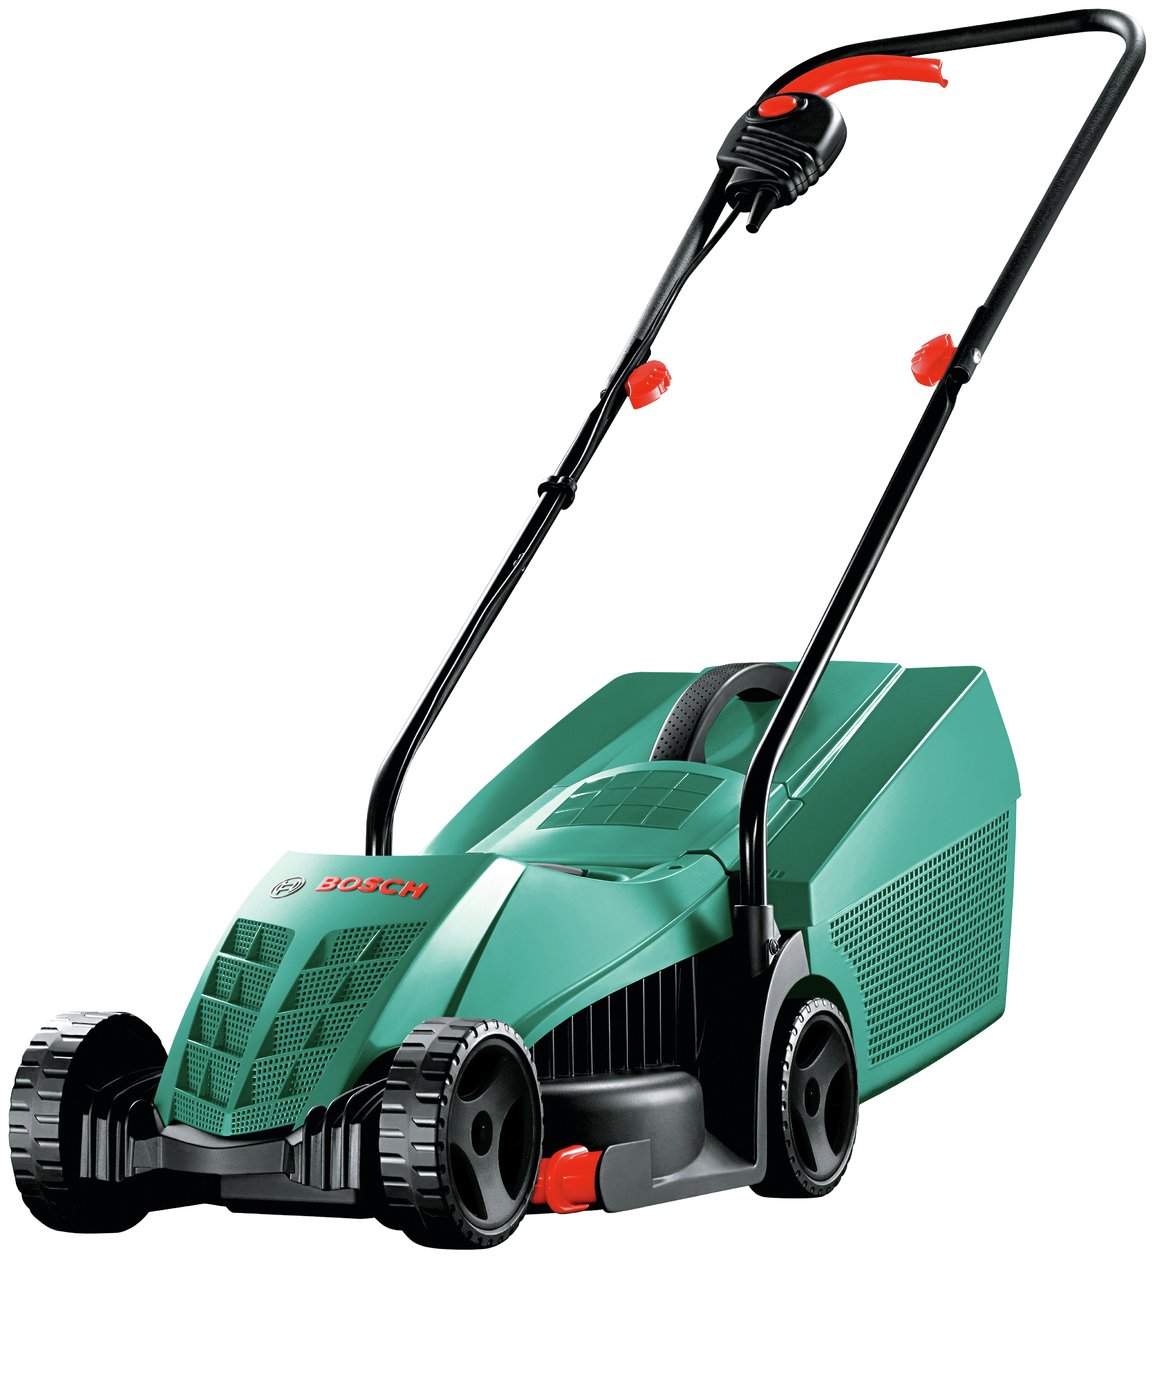 Save Over &pound14.00: Bosch 32cm Corded Rotary Lawnmower - 1200W